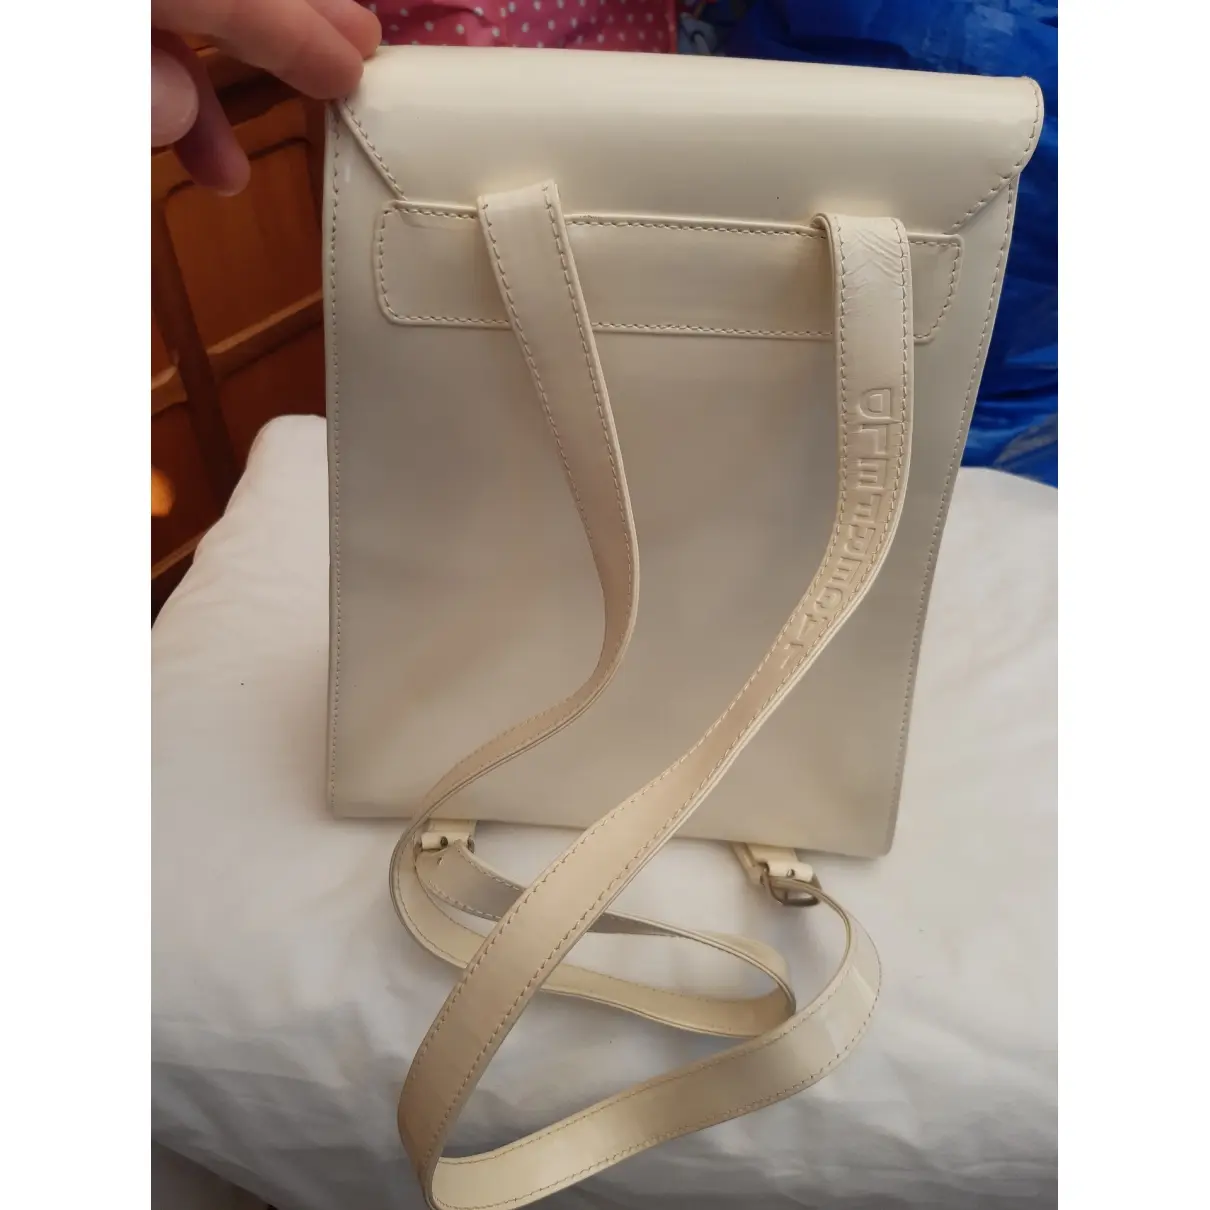 Karl Lagerfeld Patent leather backpack for sale - Vintage